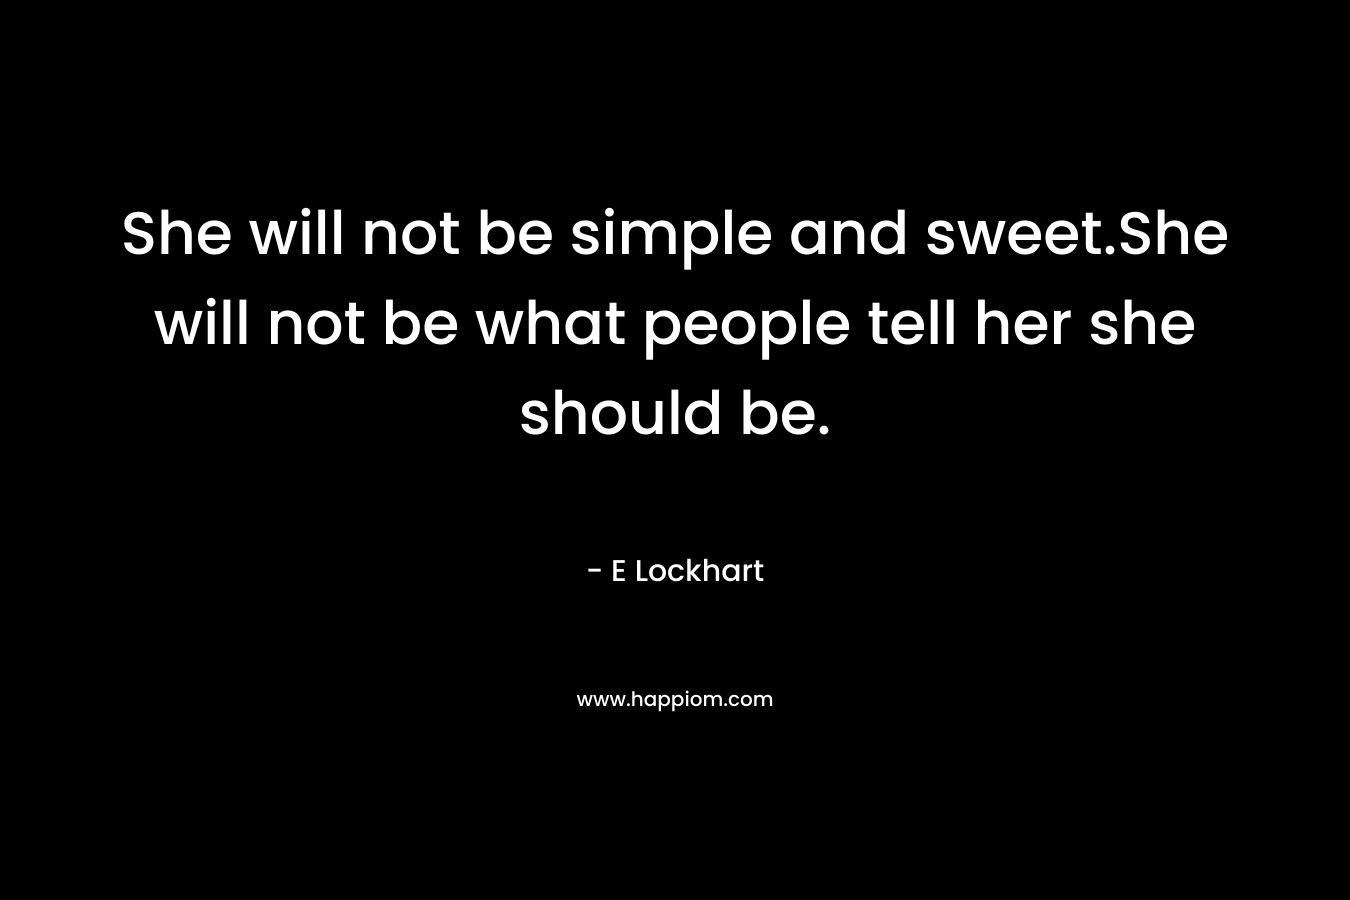 She will not be simple and sweet.She will not be what people tell her she should be. – E Lockhart